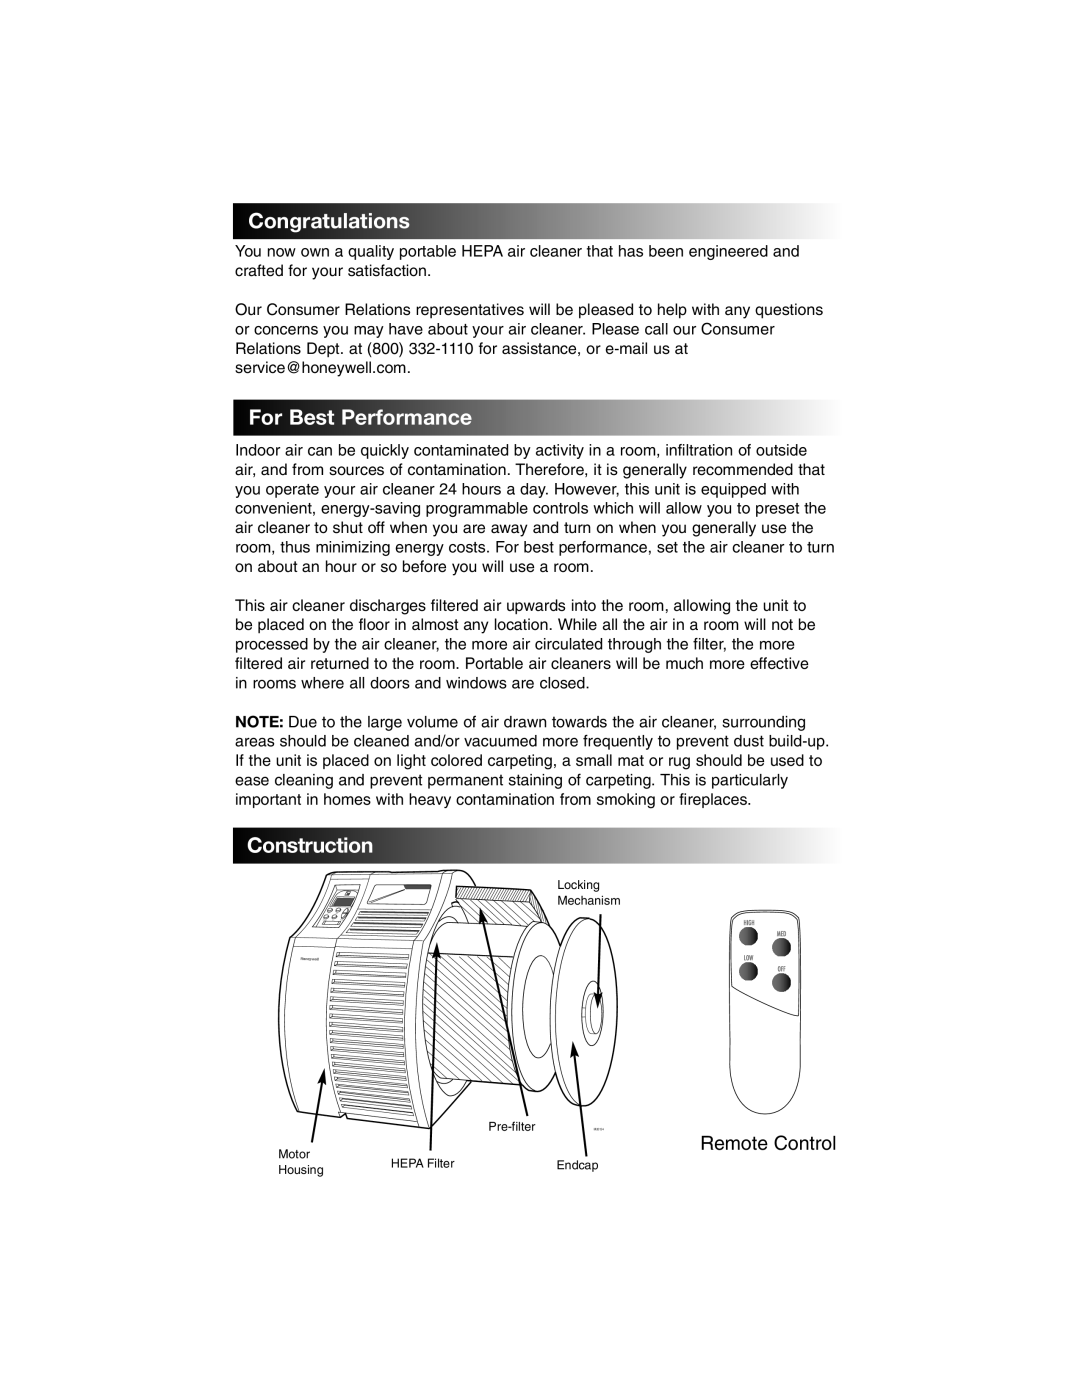 Honeywell 17005 owner manual Congratulations, ForBestPerformance, Construction, Remote Control 